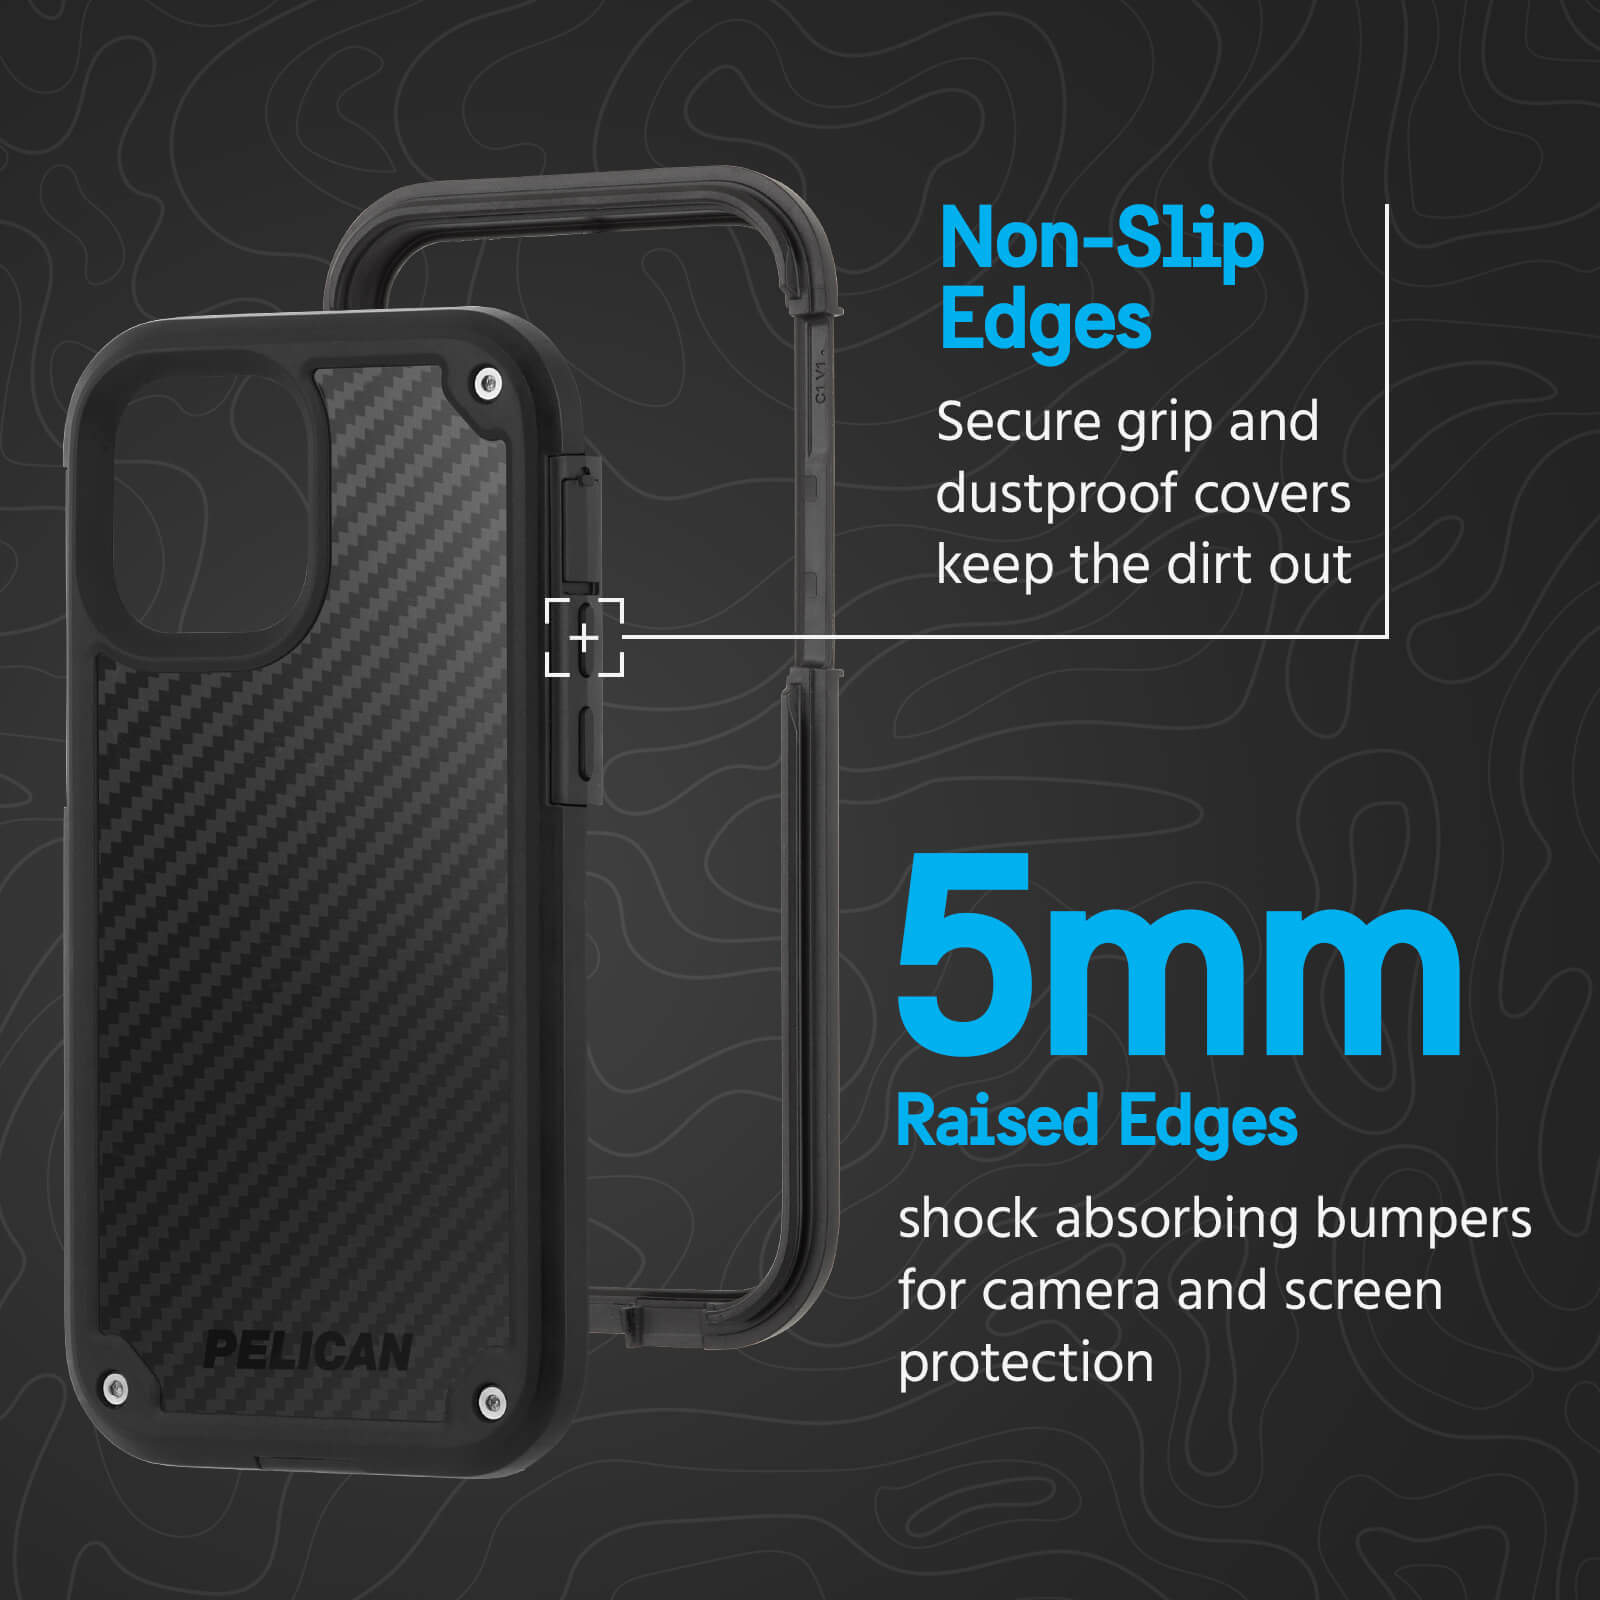 Non-slip edges secure grip and dustproof covers keep the dirt out. 5mm raised edges shock absorbing bumpers for camera and screen protection. color::Black